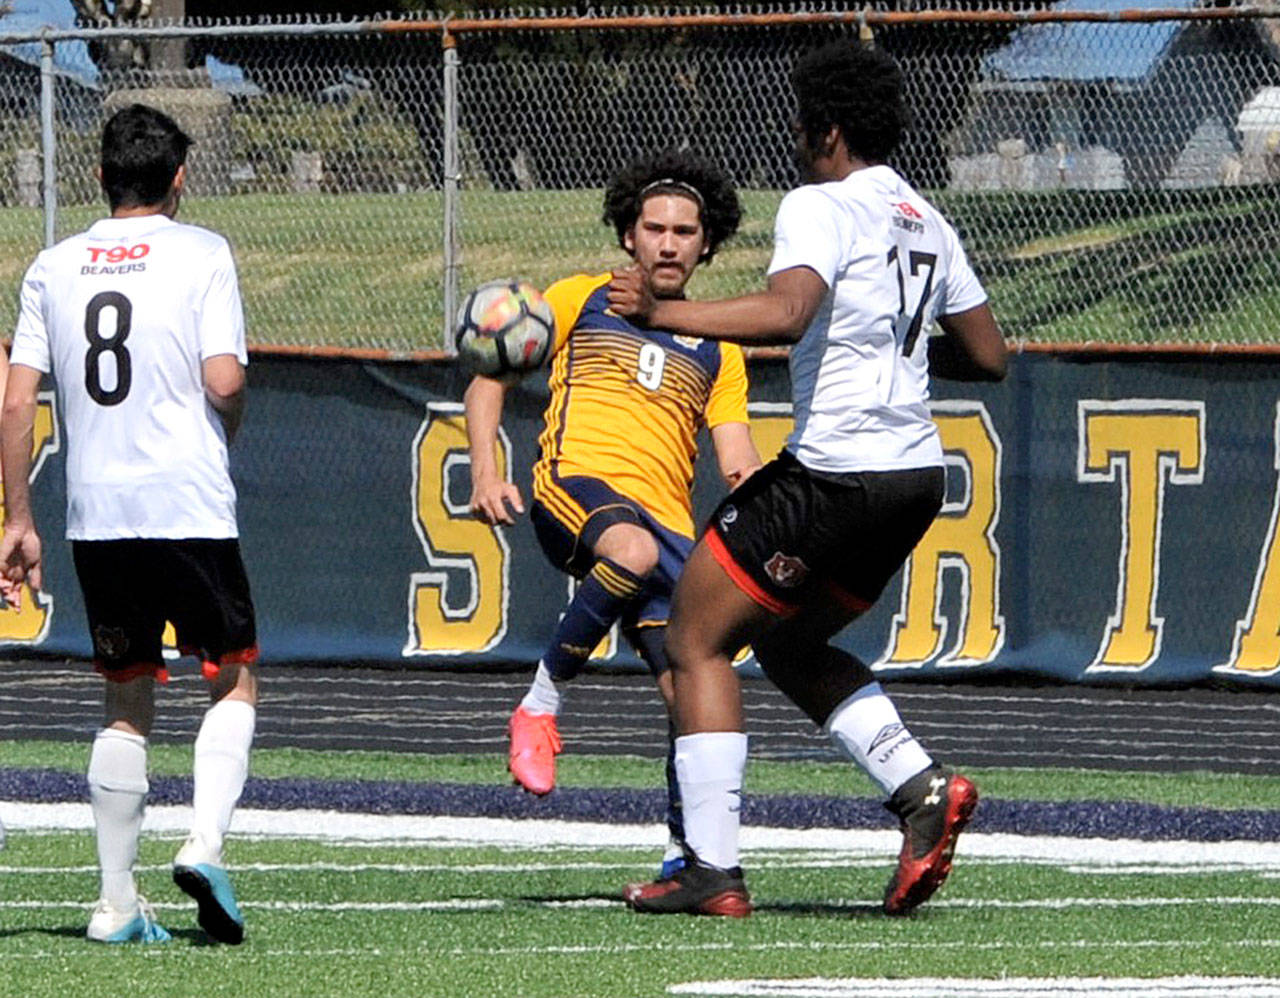 Forks’ Tony Flores-Hernandez (9) battles for a loose ball against Elma in Forks on Saturday. (Lonnie Archibald/for Peninsula Daily News)